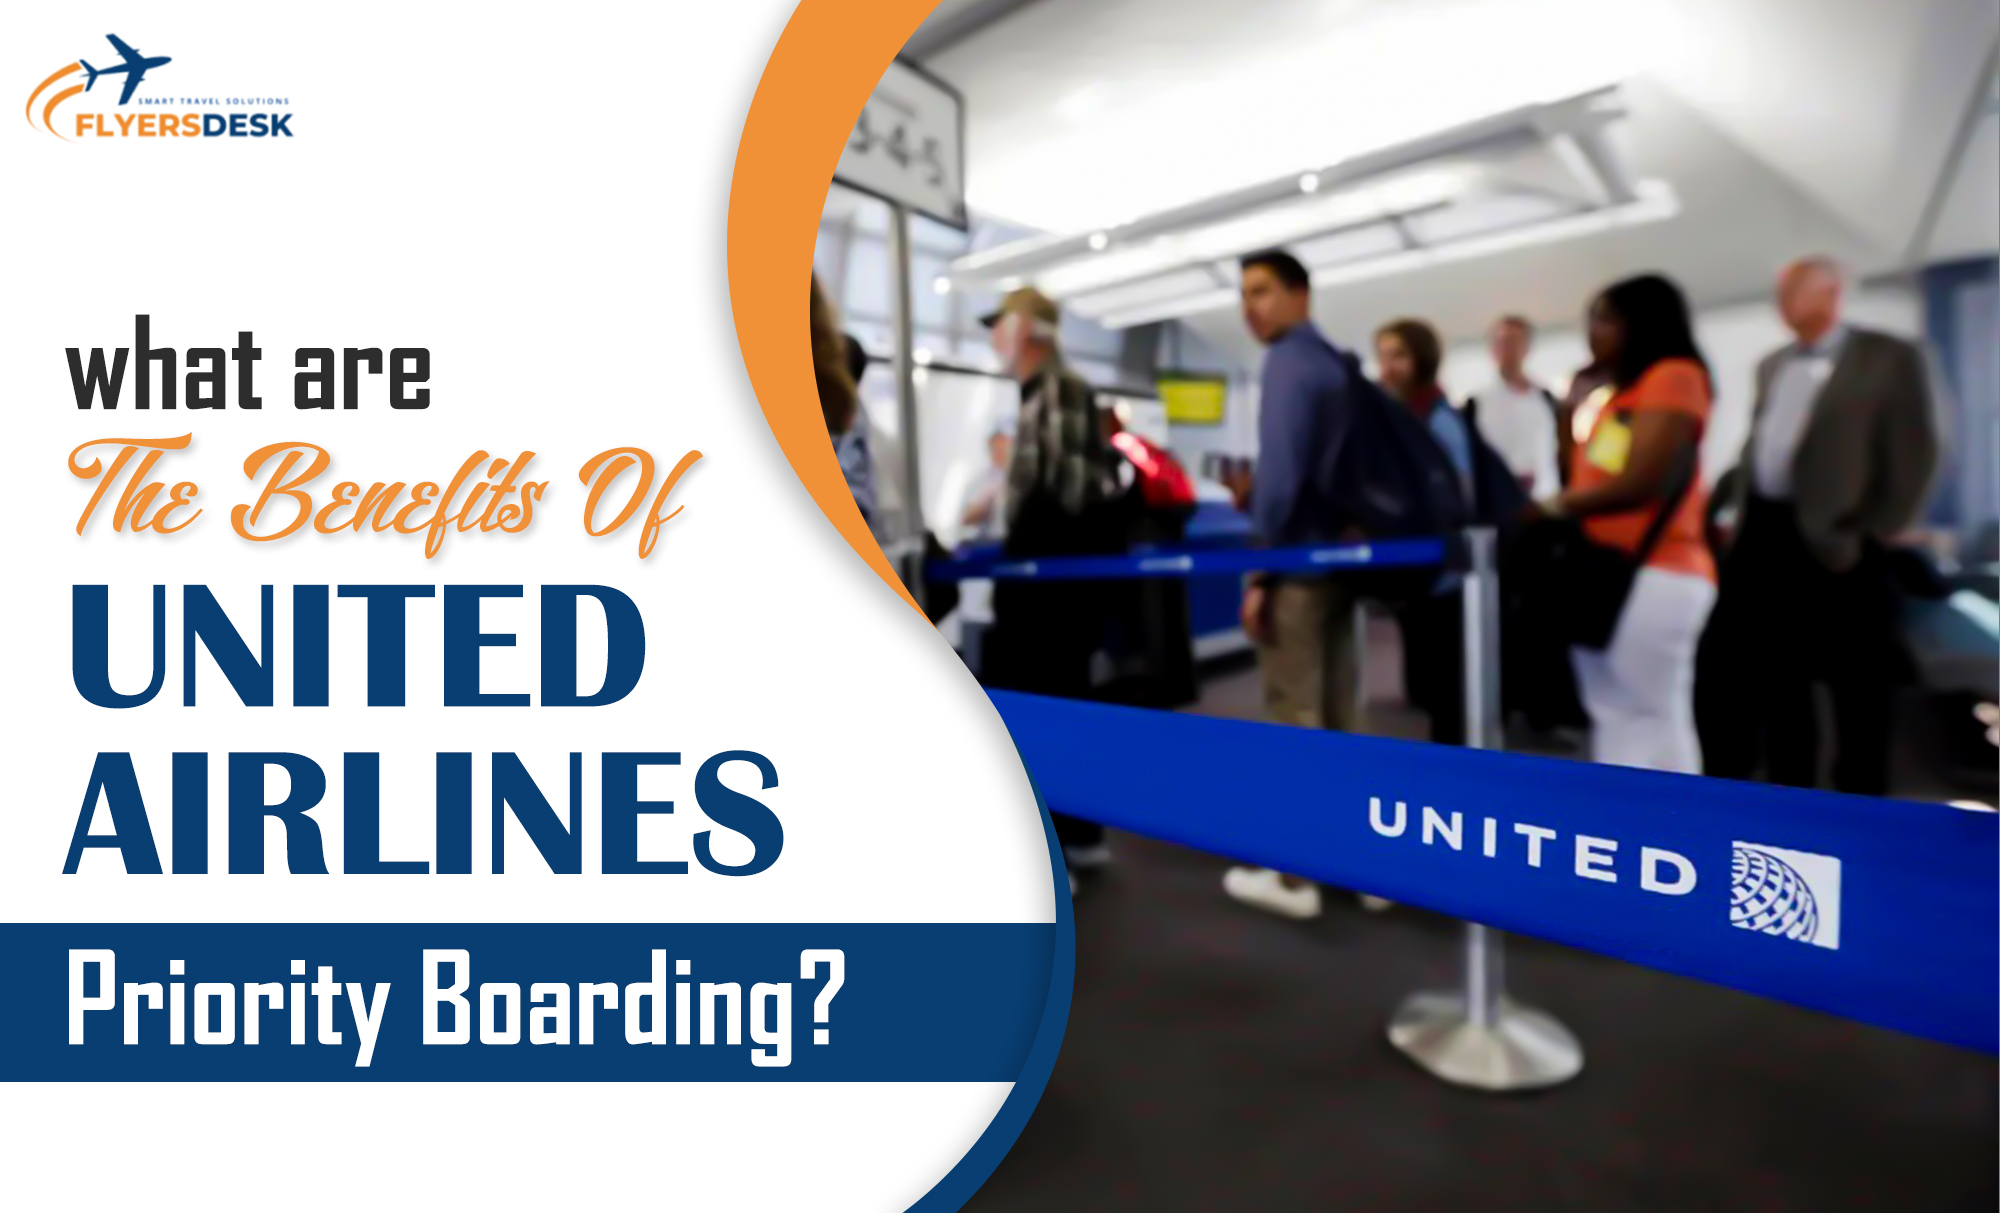 united airlines priority boarding